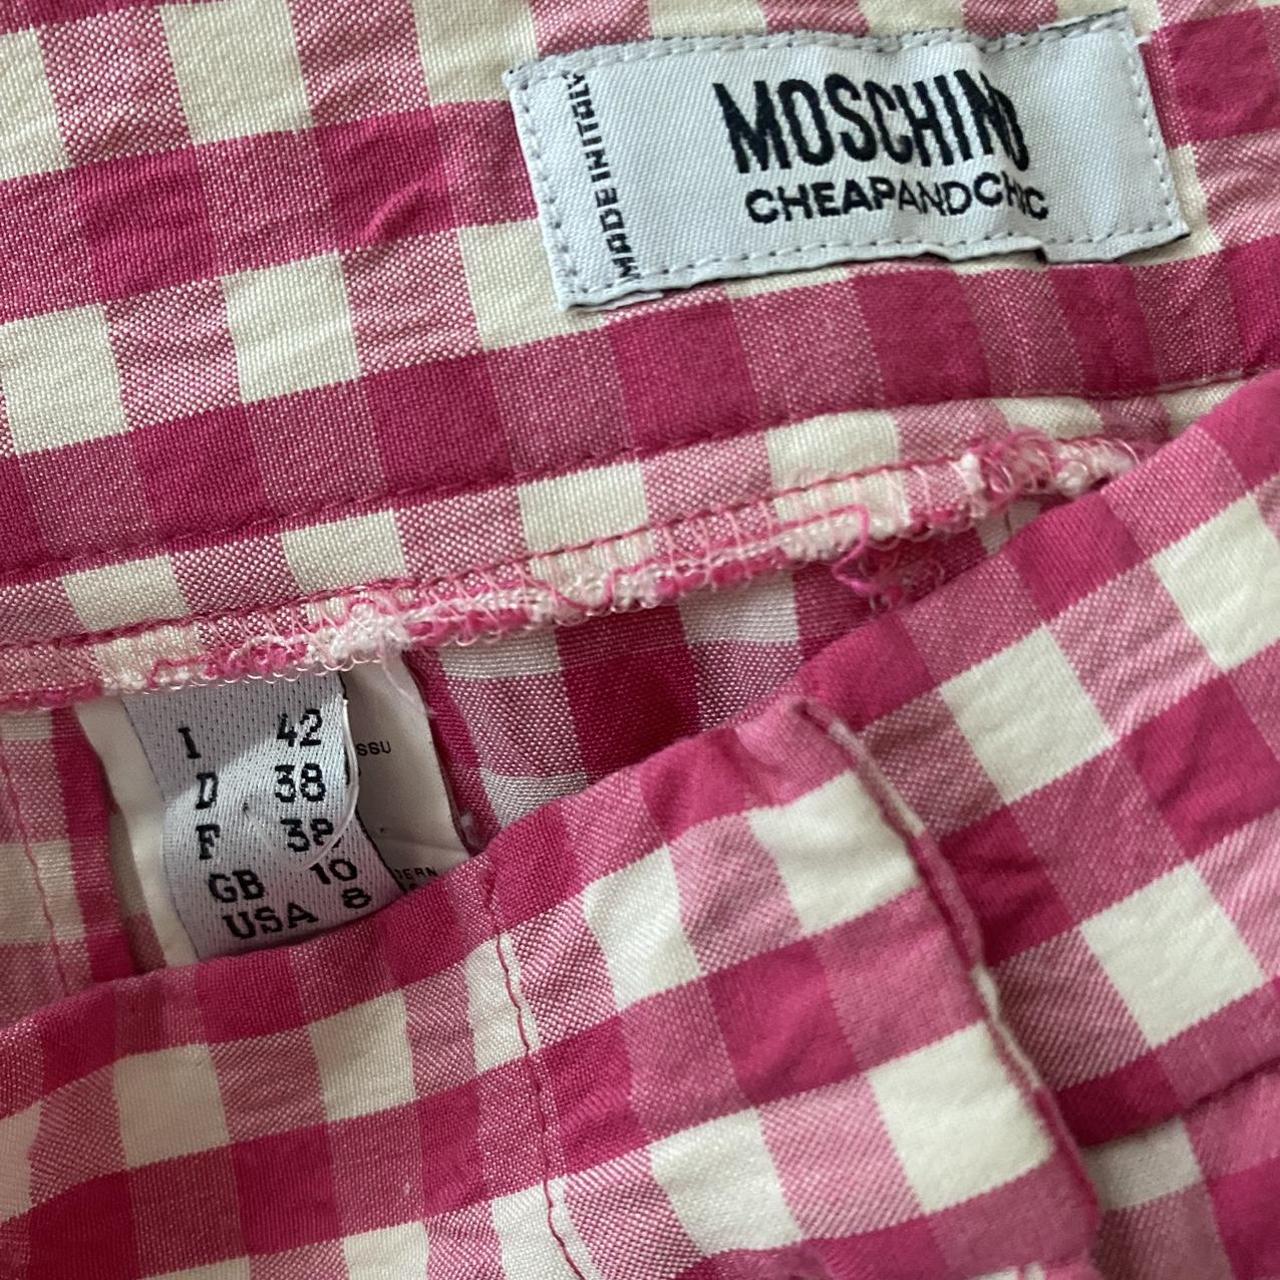 Moschino Cheap & Chic Women's Pink and White Trousers (3)